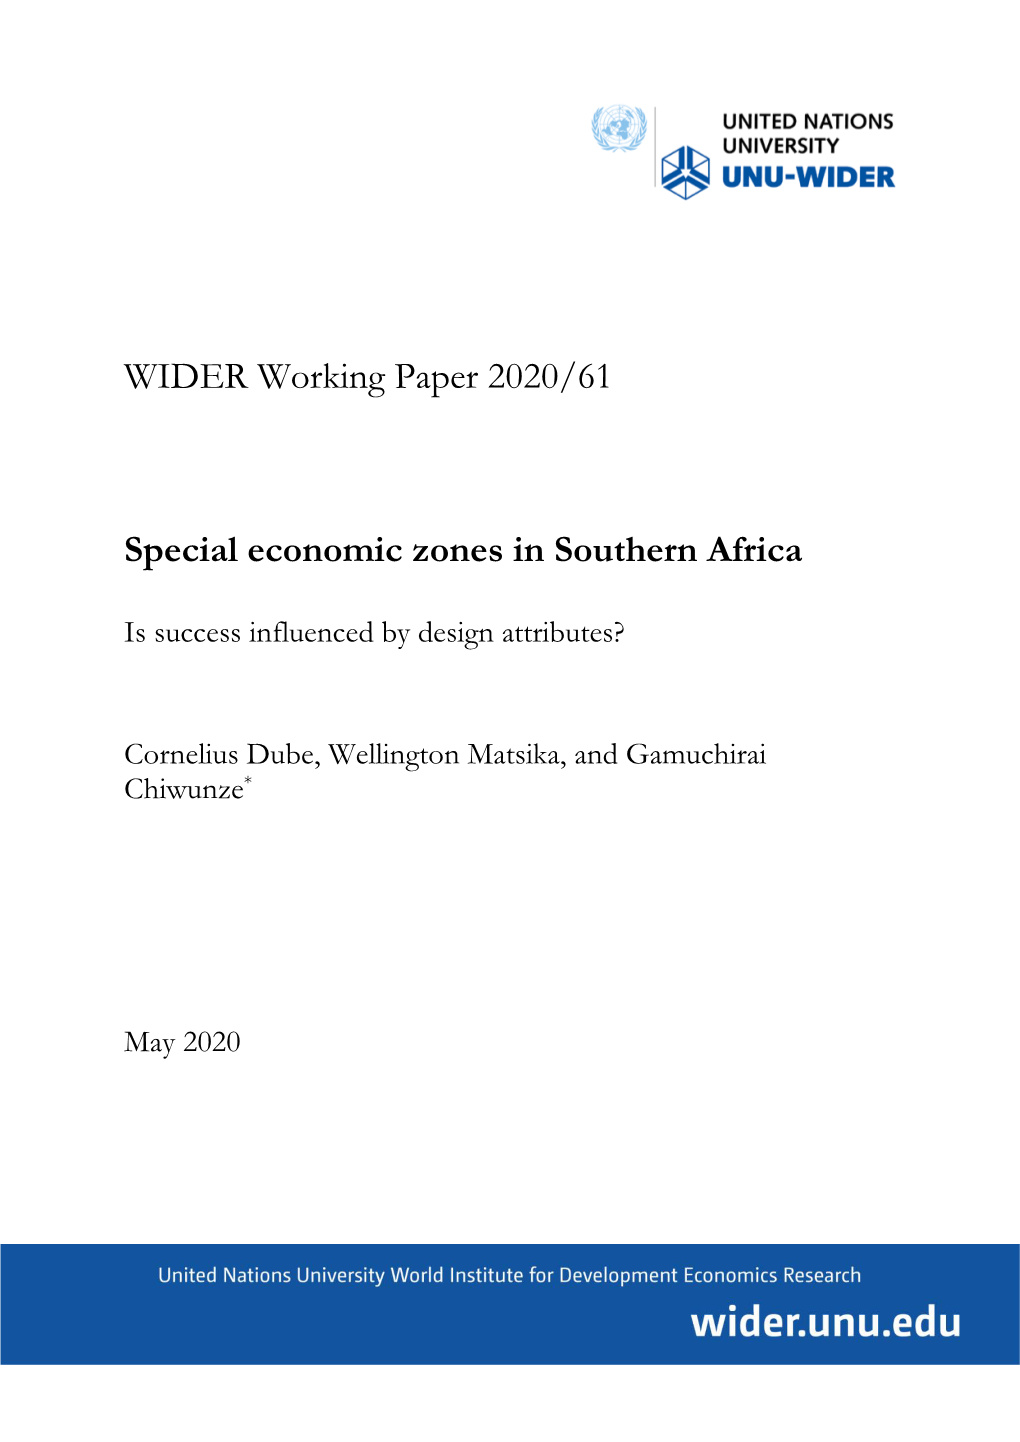 Special Economic Zones in Southern Africa